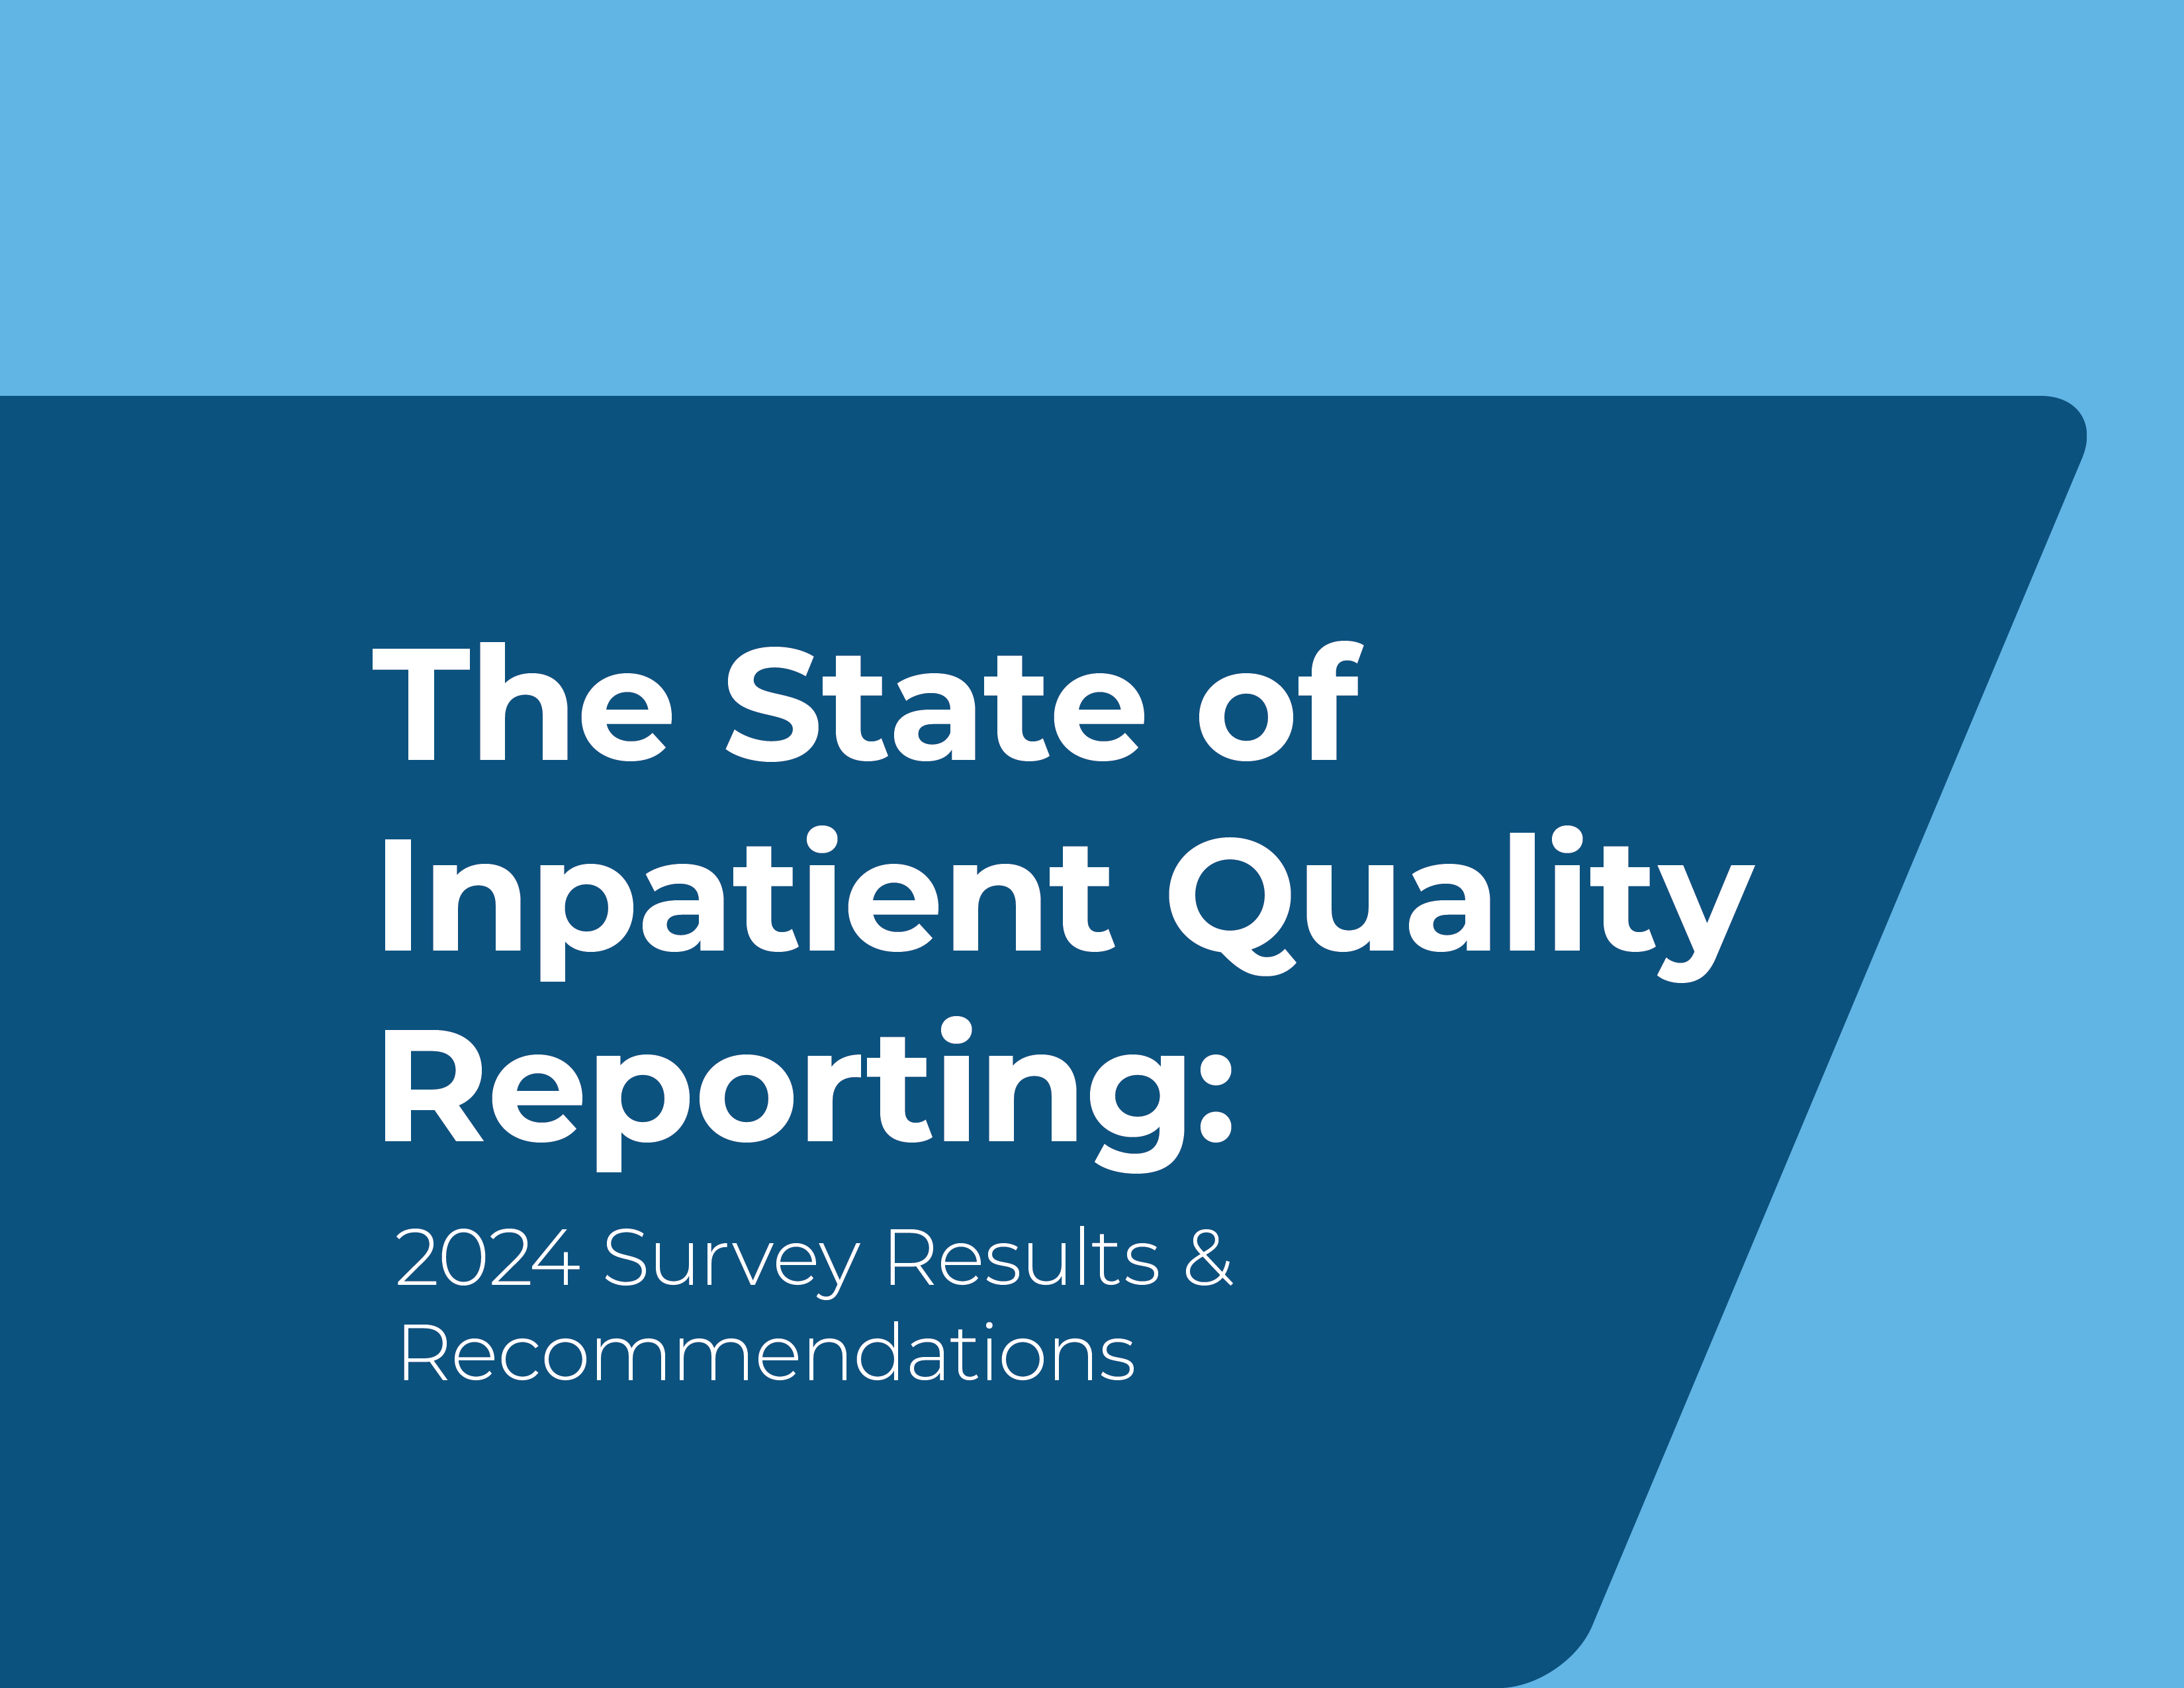 State of Inpatient Quality Reporting: 2024 Survey Results & Recomendations